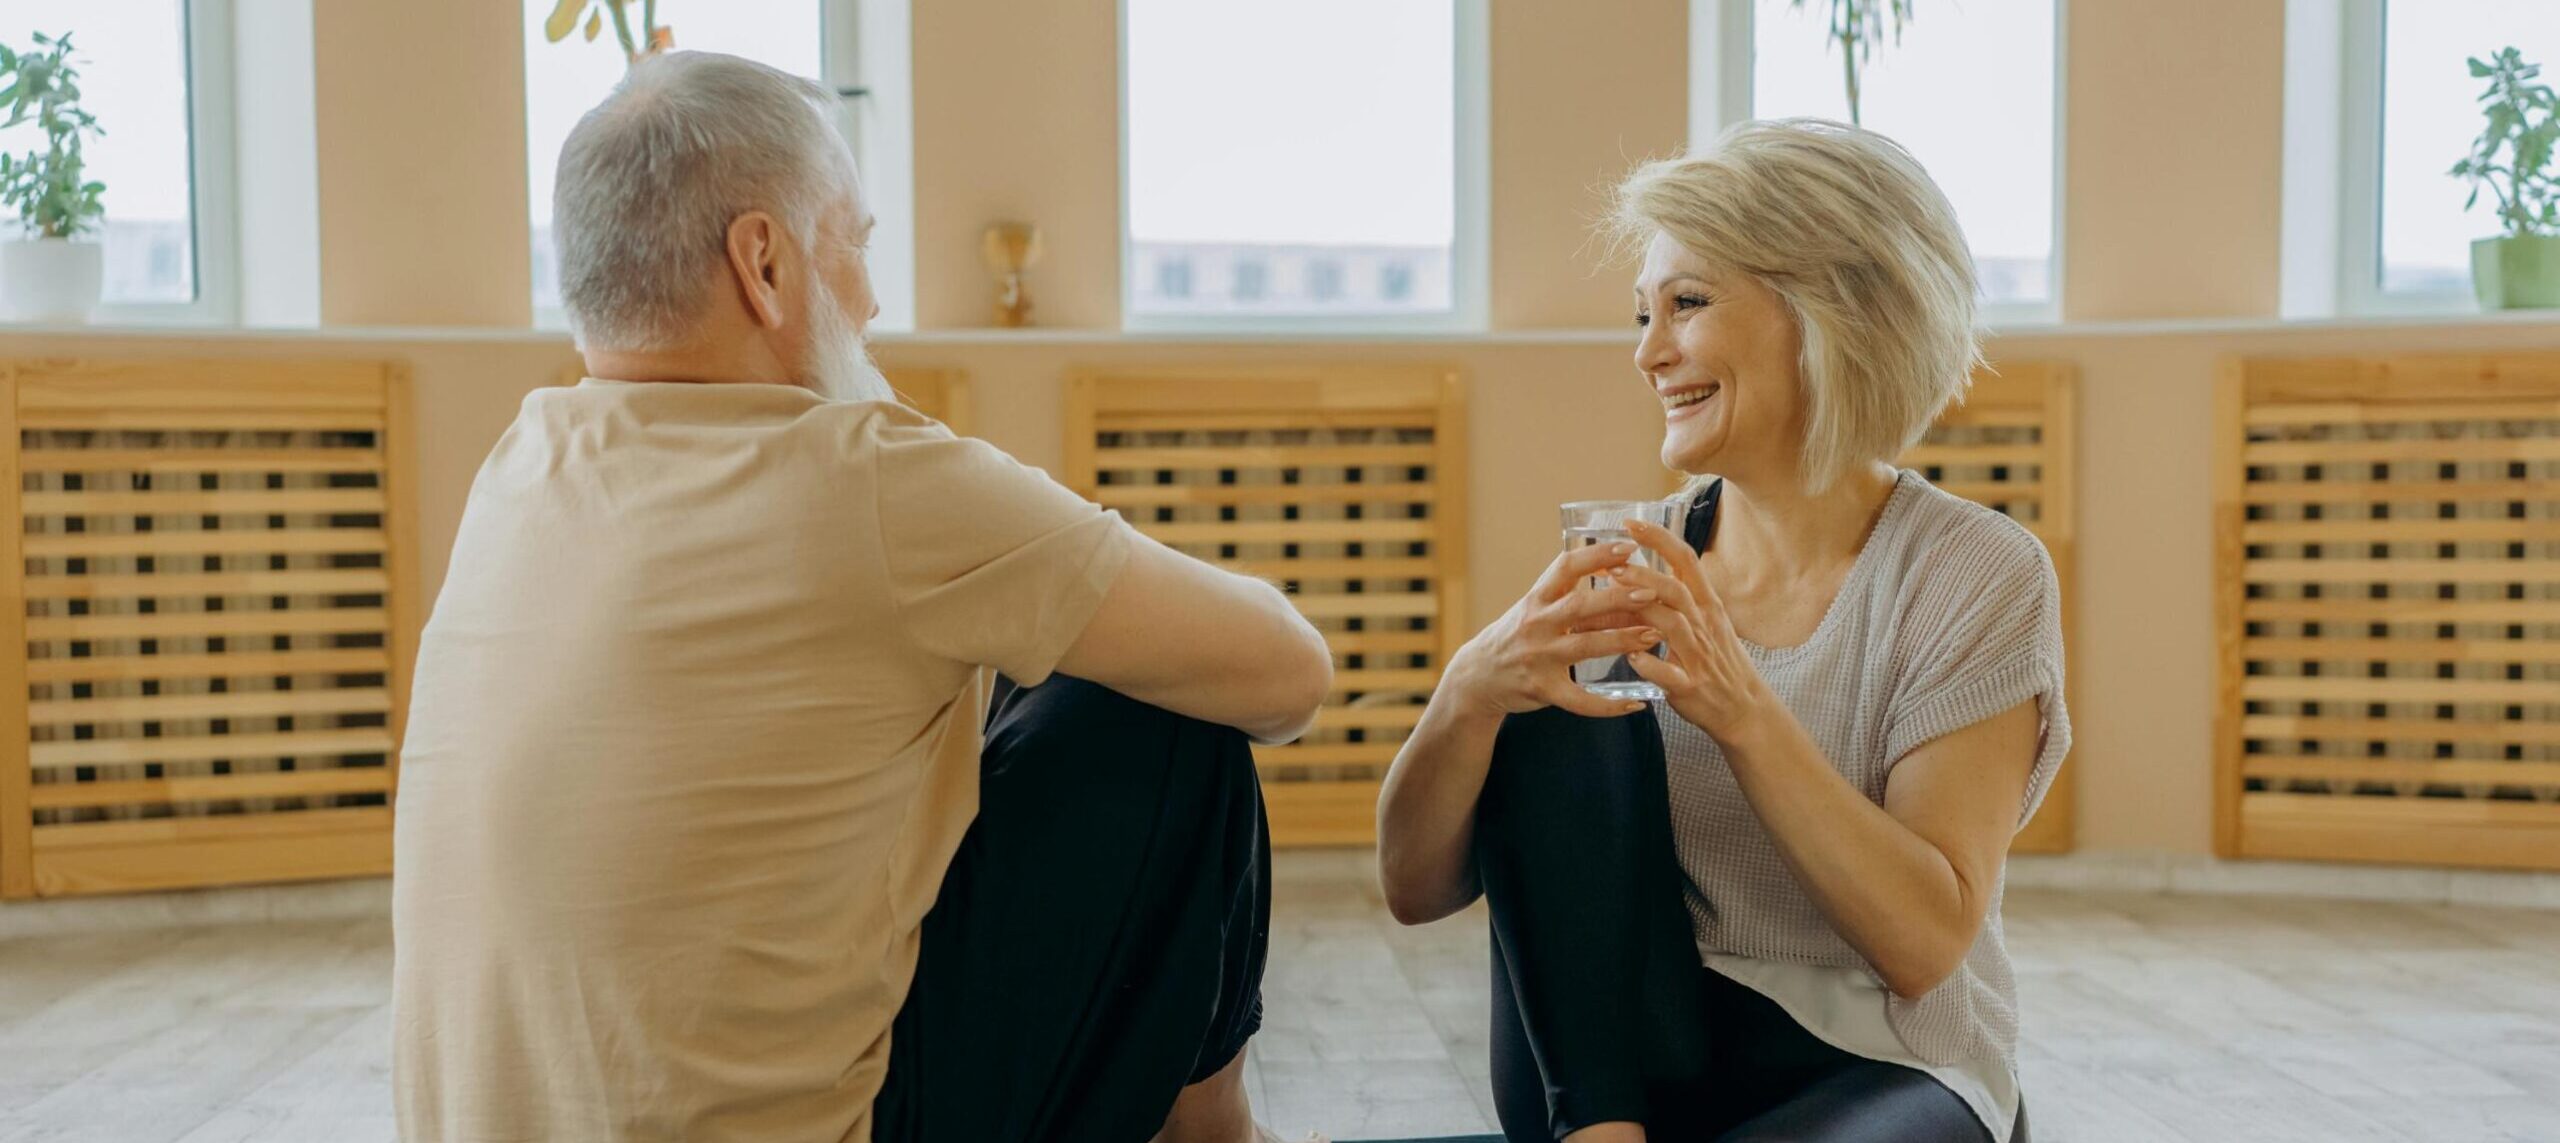 An Elderly Man and Woman Having Conversation while Sitting on Yoga Mats